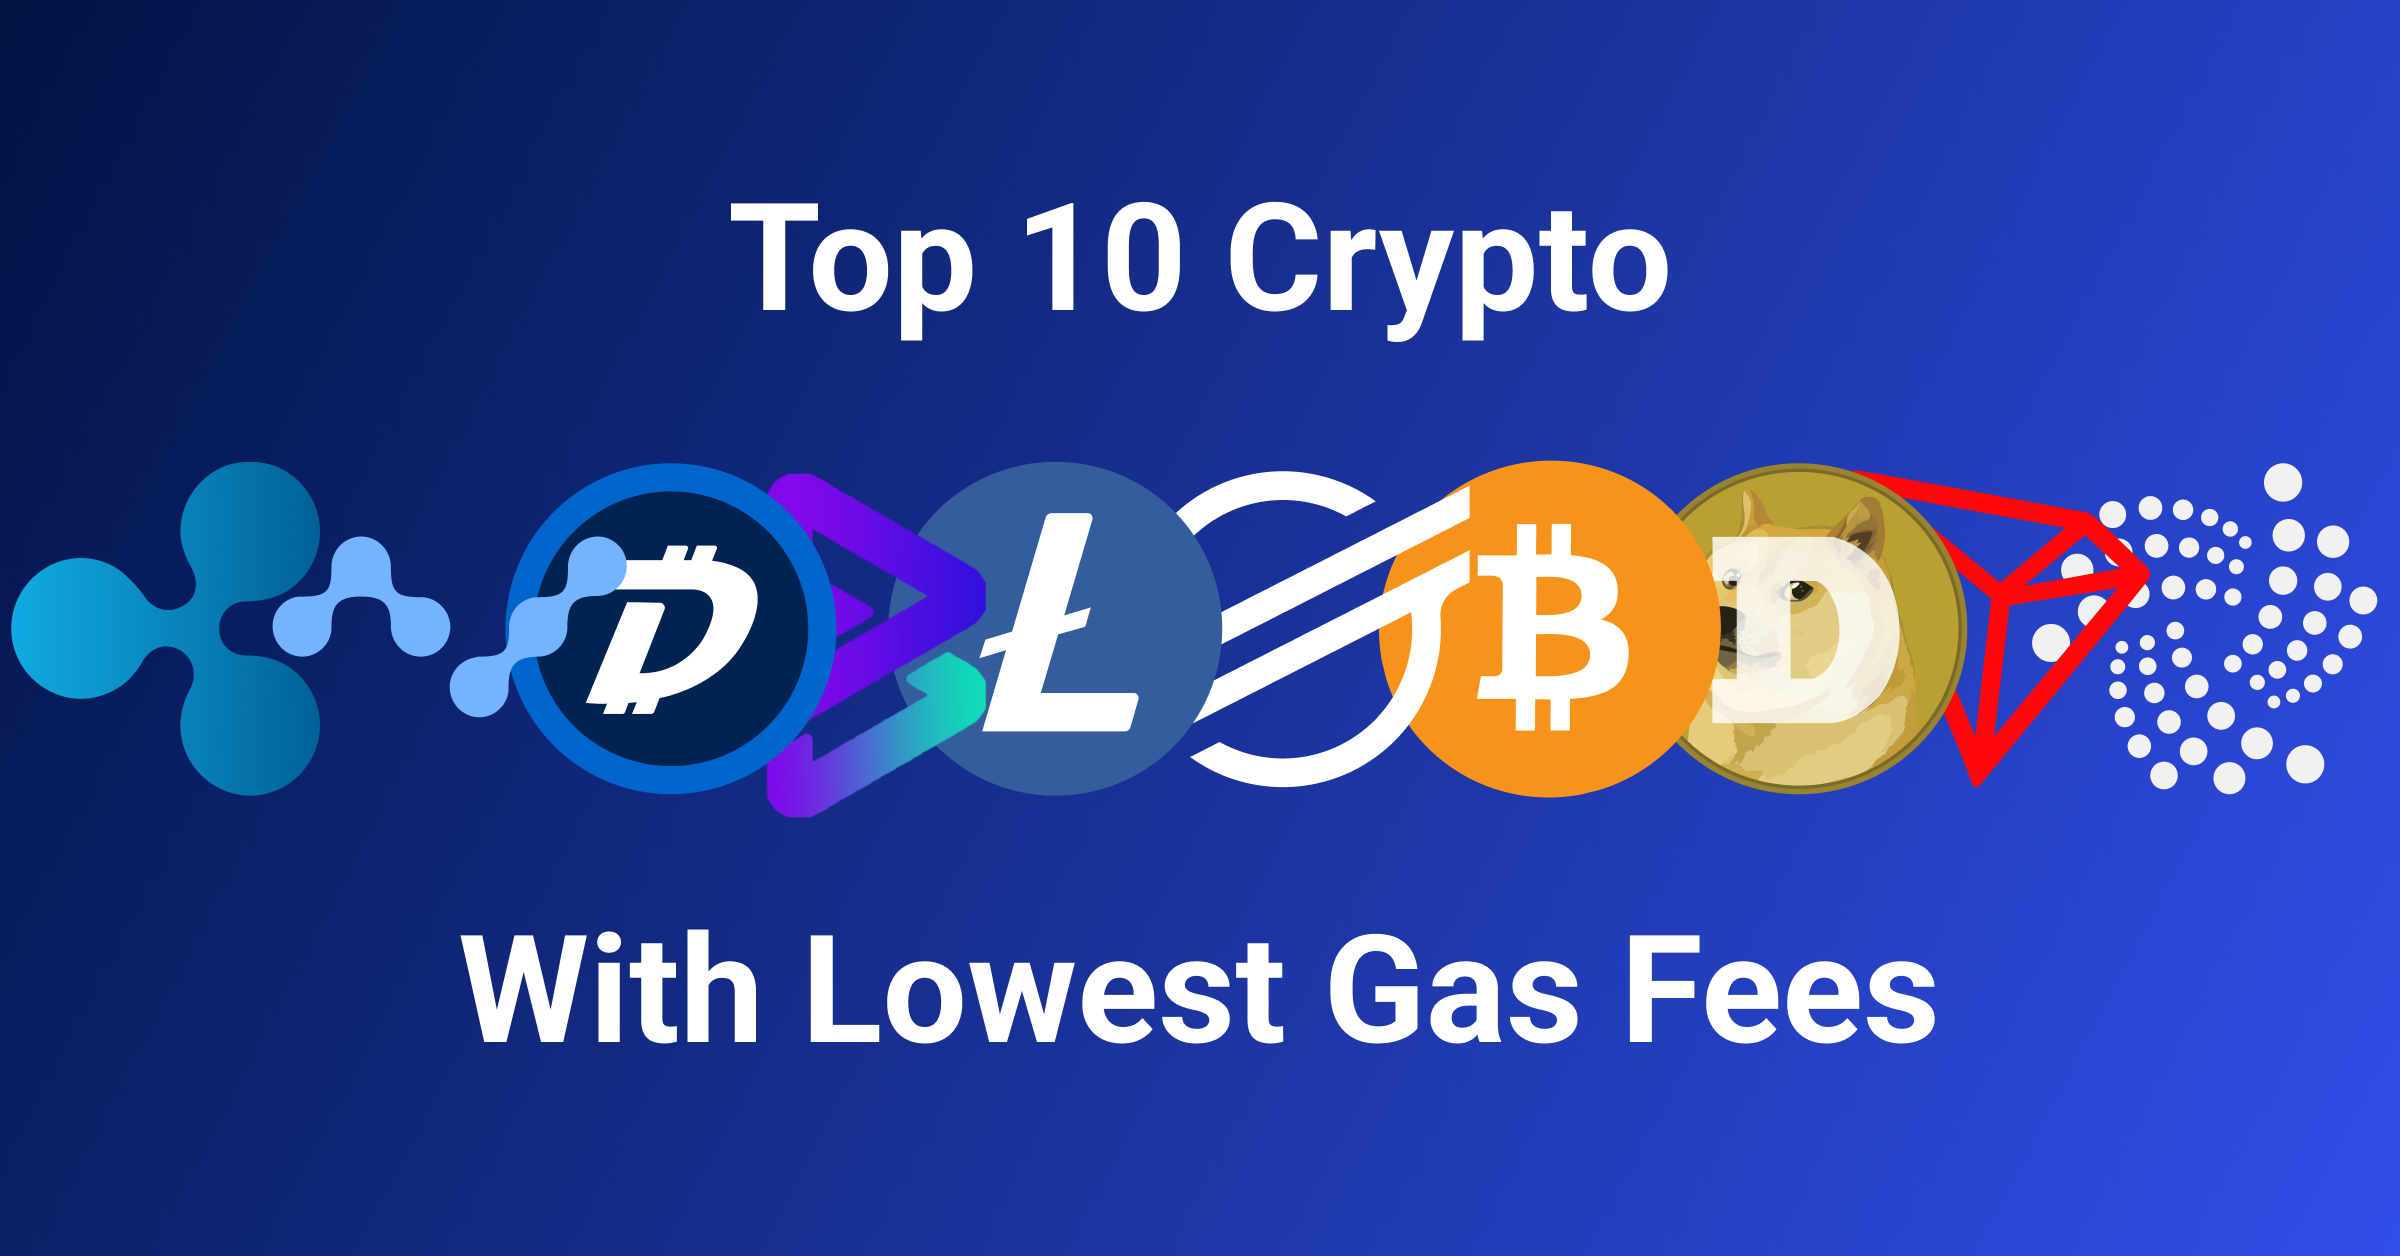 Top 10 crypto with lowest gas fees